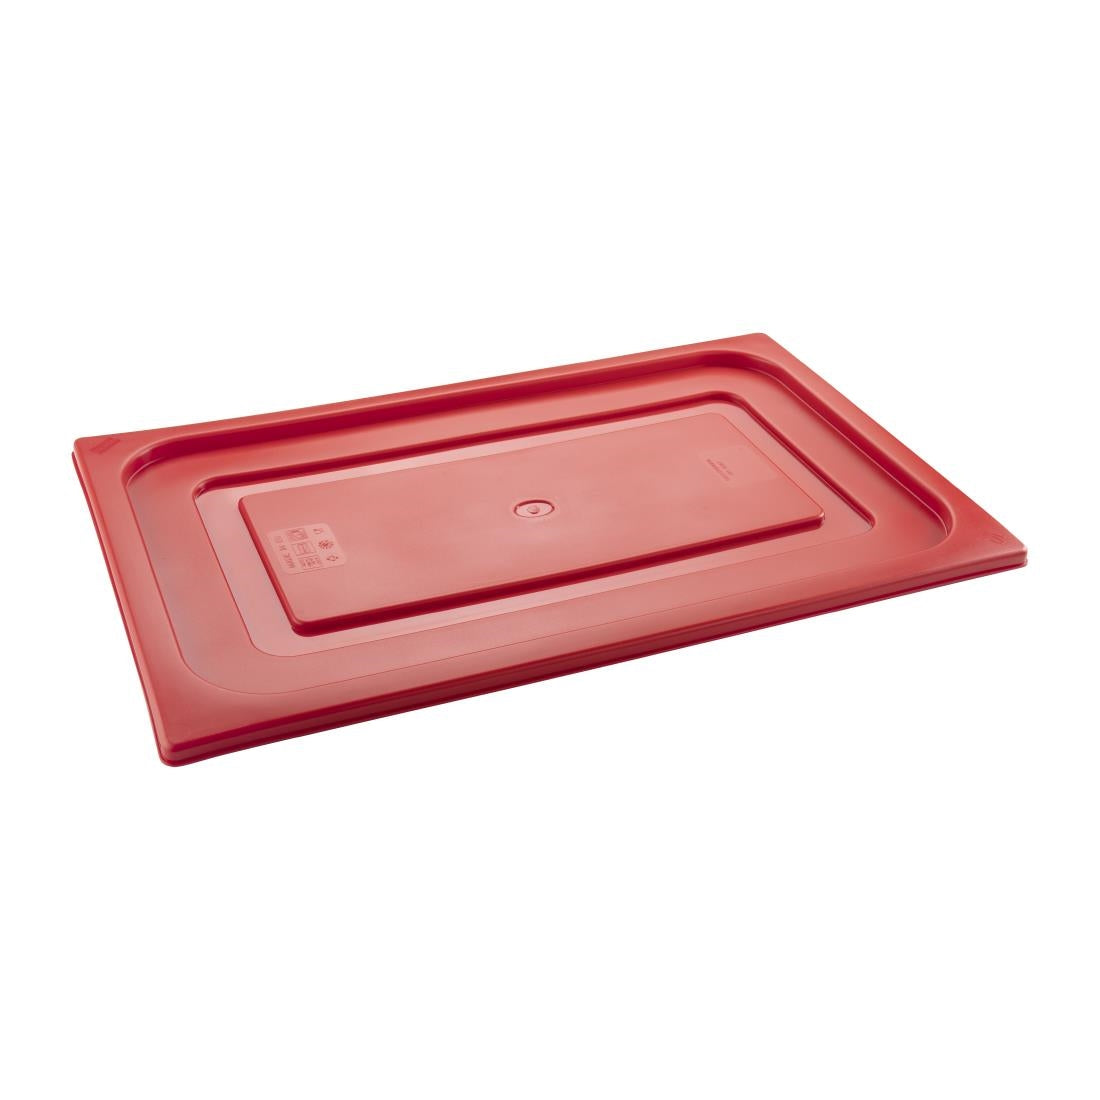 HT888 Pujadas Red Polinorm Gastronorm Lid 1/1GN